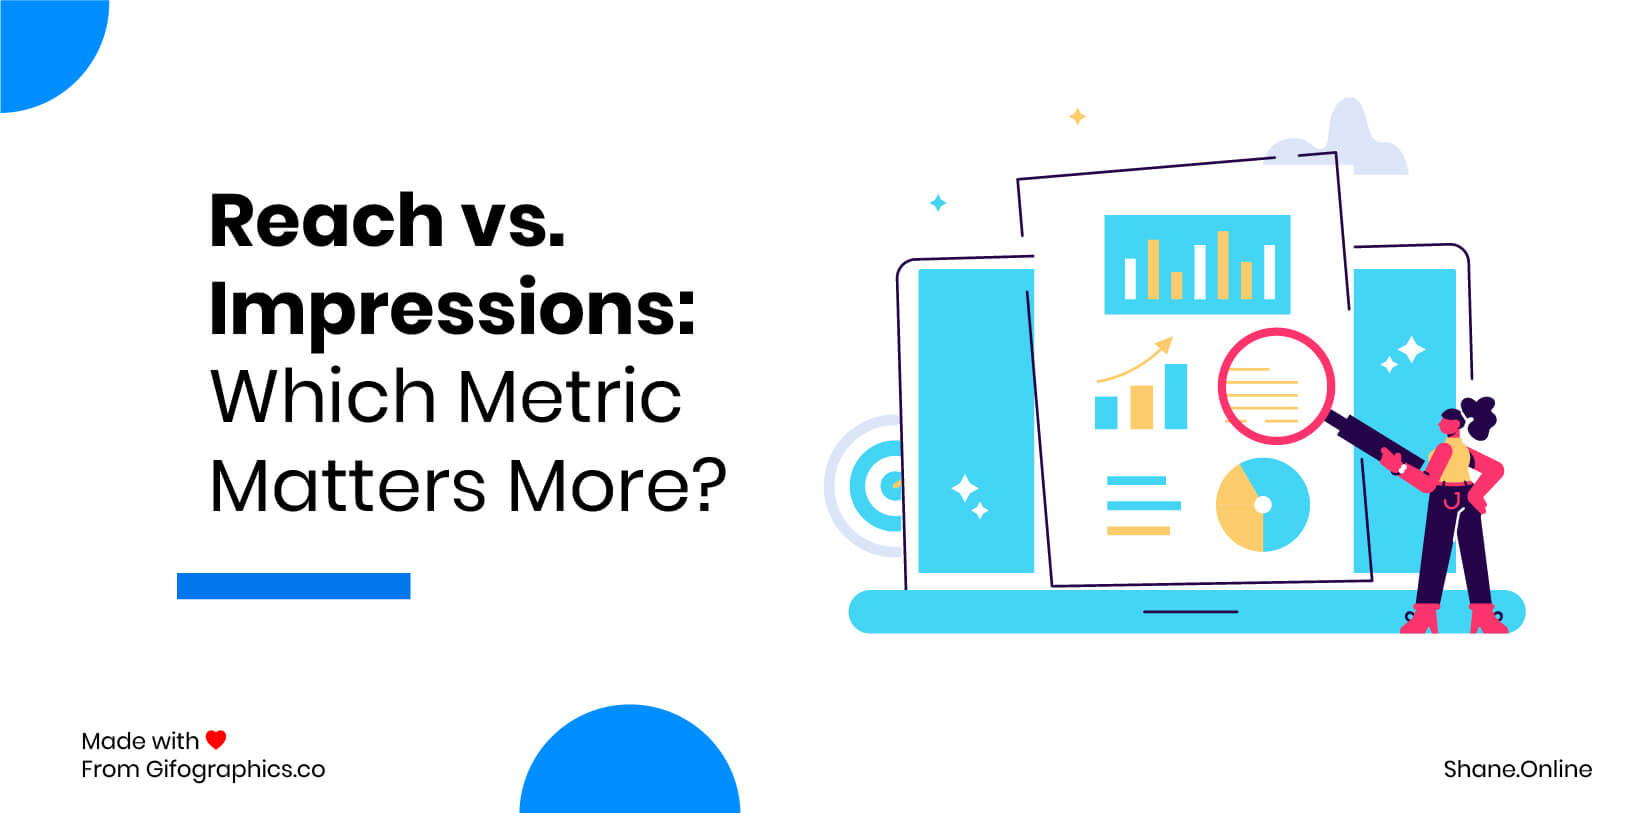 Reach vs. Impressions- Which Metric Matters More